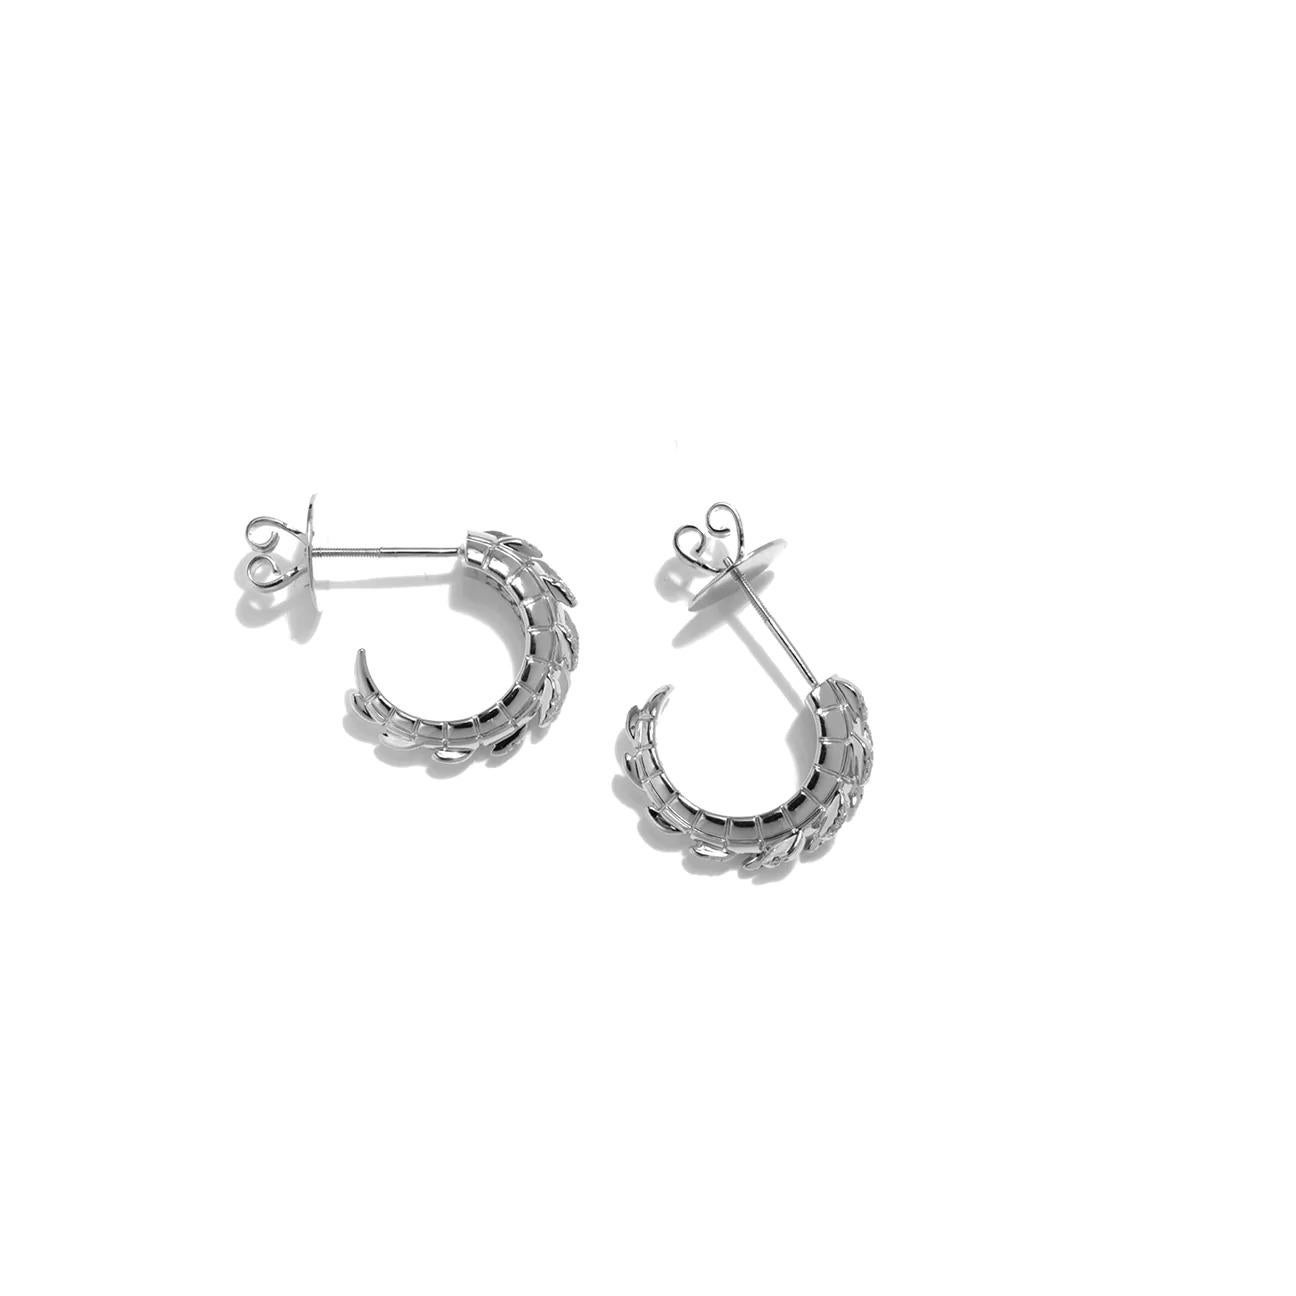 A sophisticated pair of hoops with a fierce edge. Embellished with white brilliant cut diamonds for an elevated day to night look, these hoops bear all the subtle hallmarks of exceptional craftsmanship. A tapering, spiked tail and a subtle croc